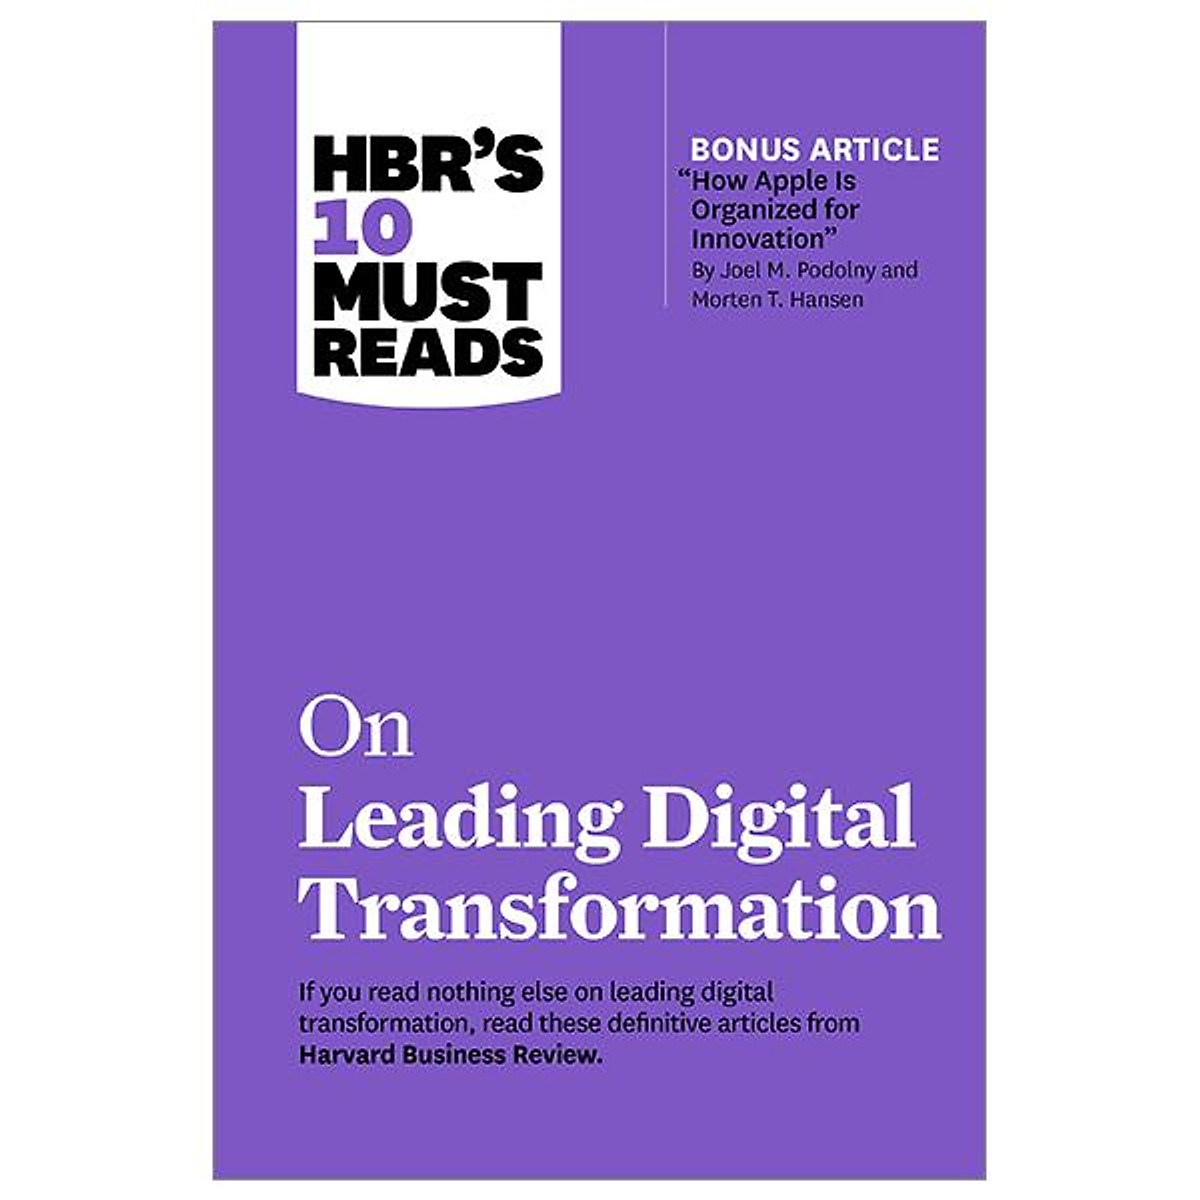 HBR's 10 Must Reads On Leading Digital Transformation